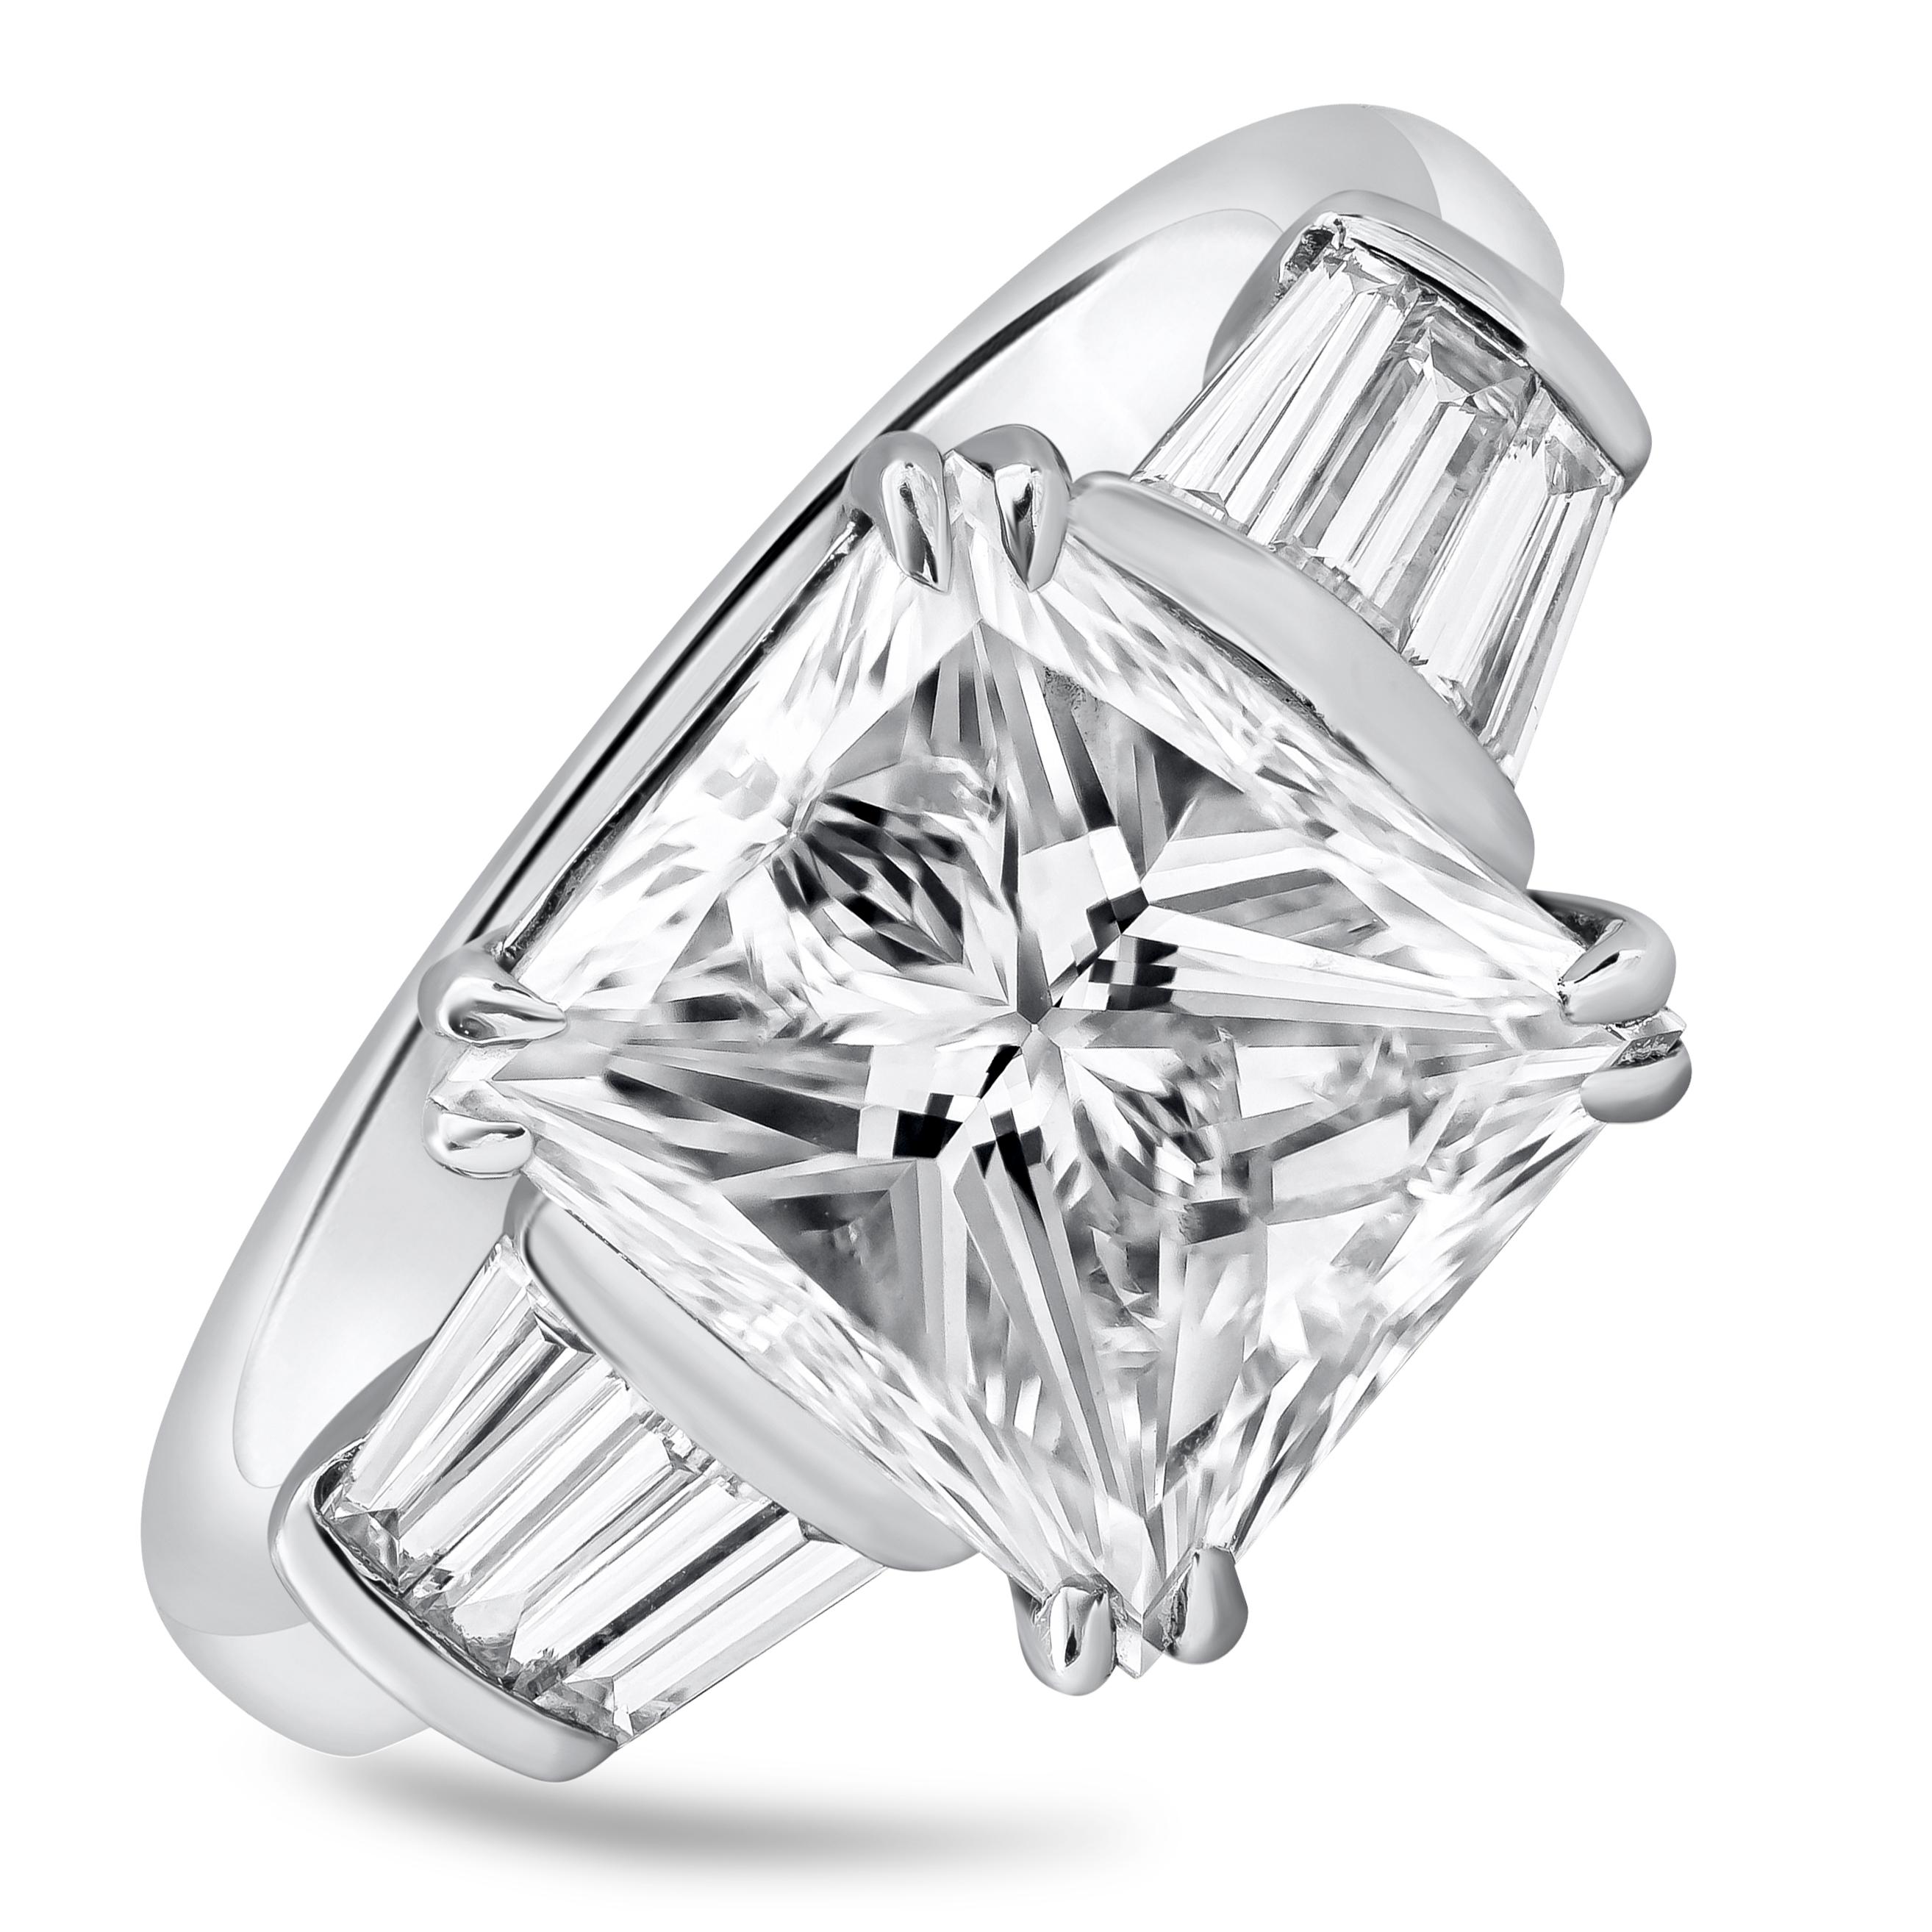 A unique yet classic style engagement ring featuring a 5.03 carat princess cut diamond that GIA Certified as G color VS2 in clarity. Three perfectly matched tapered baguette diamonds invisibly set on each side. Baguette diamonds weigh 1.01 carats